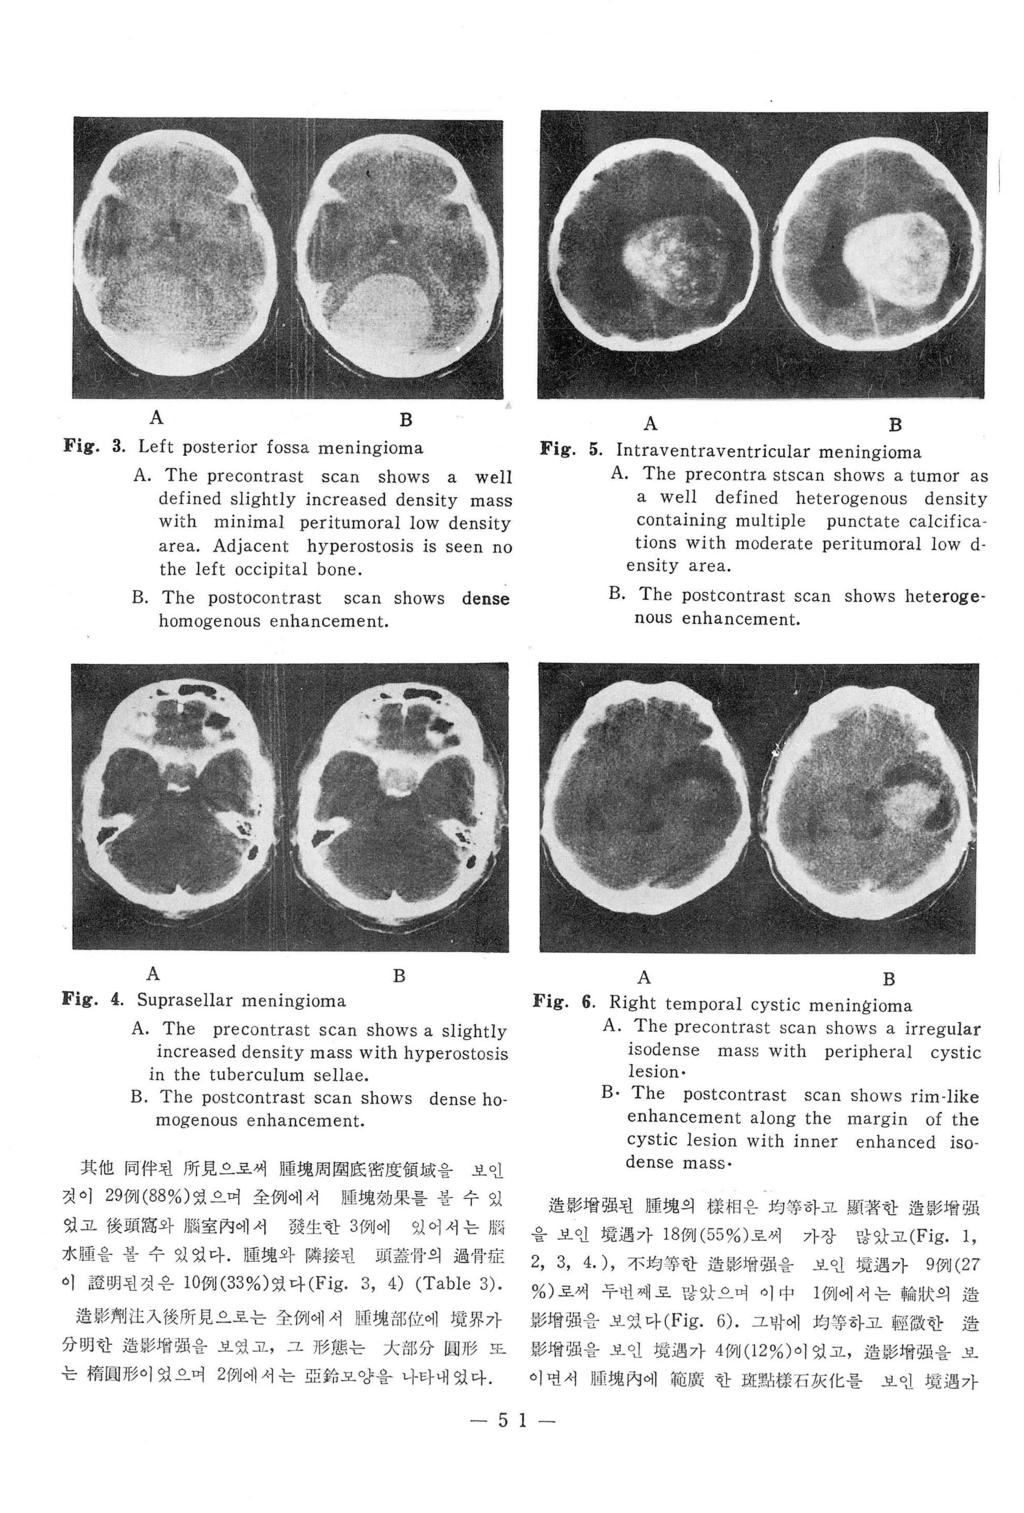 Fig. 3. Left posterior fossa meningioma. The precontrast scan shows a well defined slightly increased density mass with minimal peritumoral low density area.